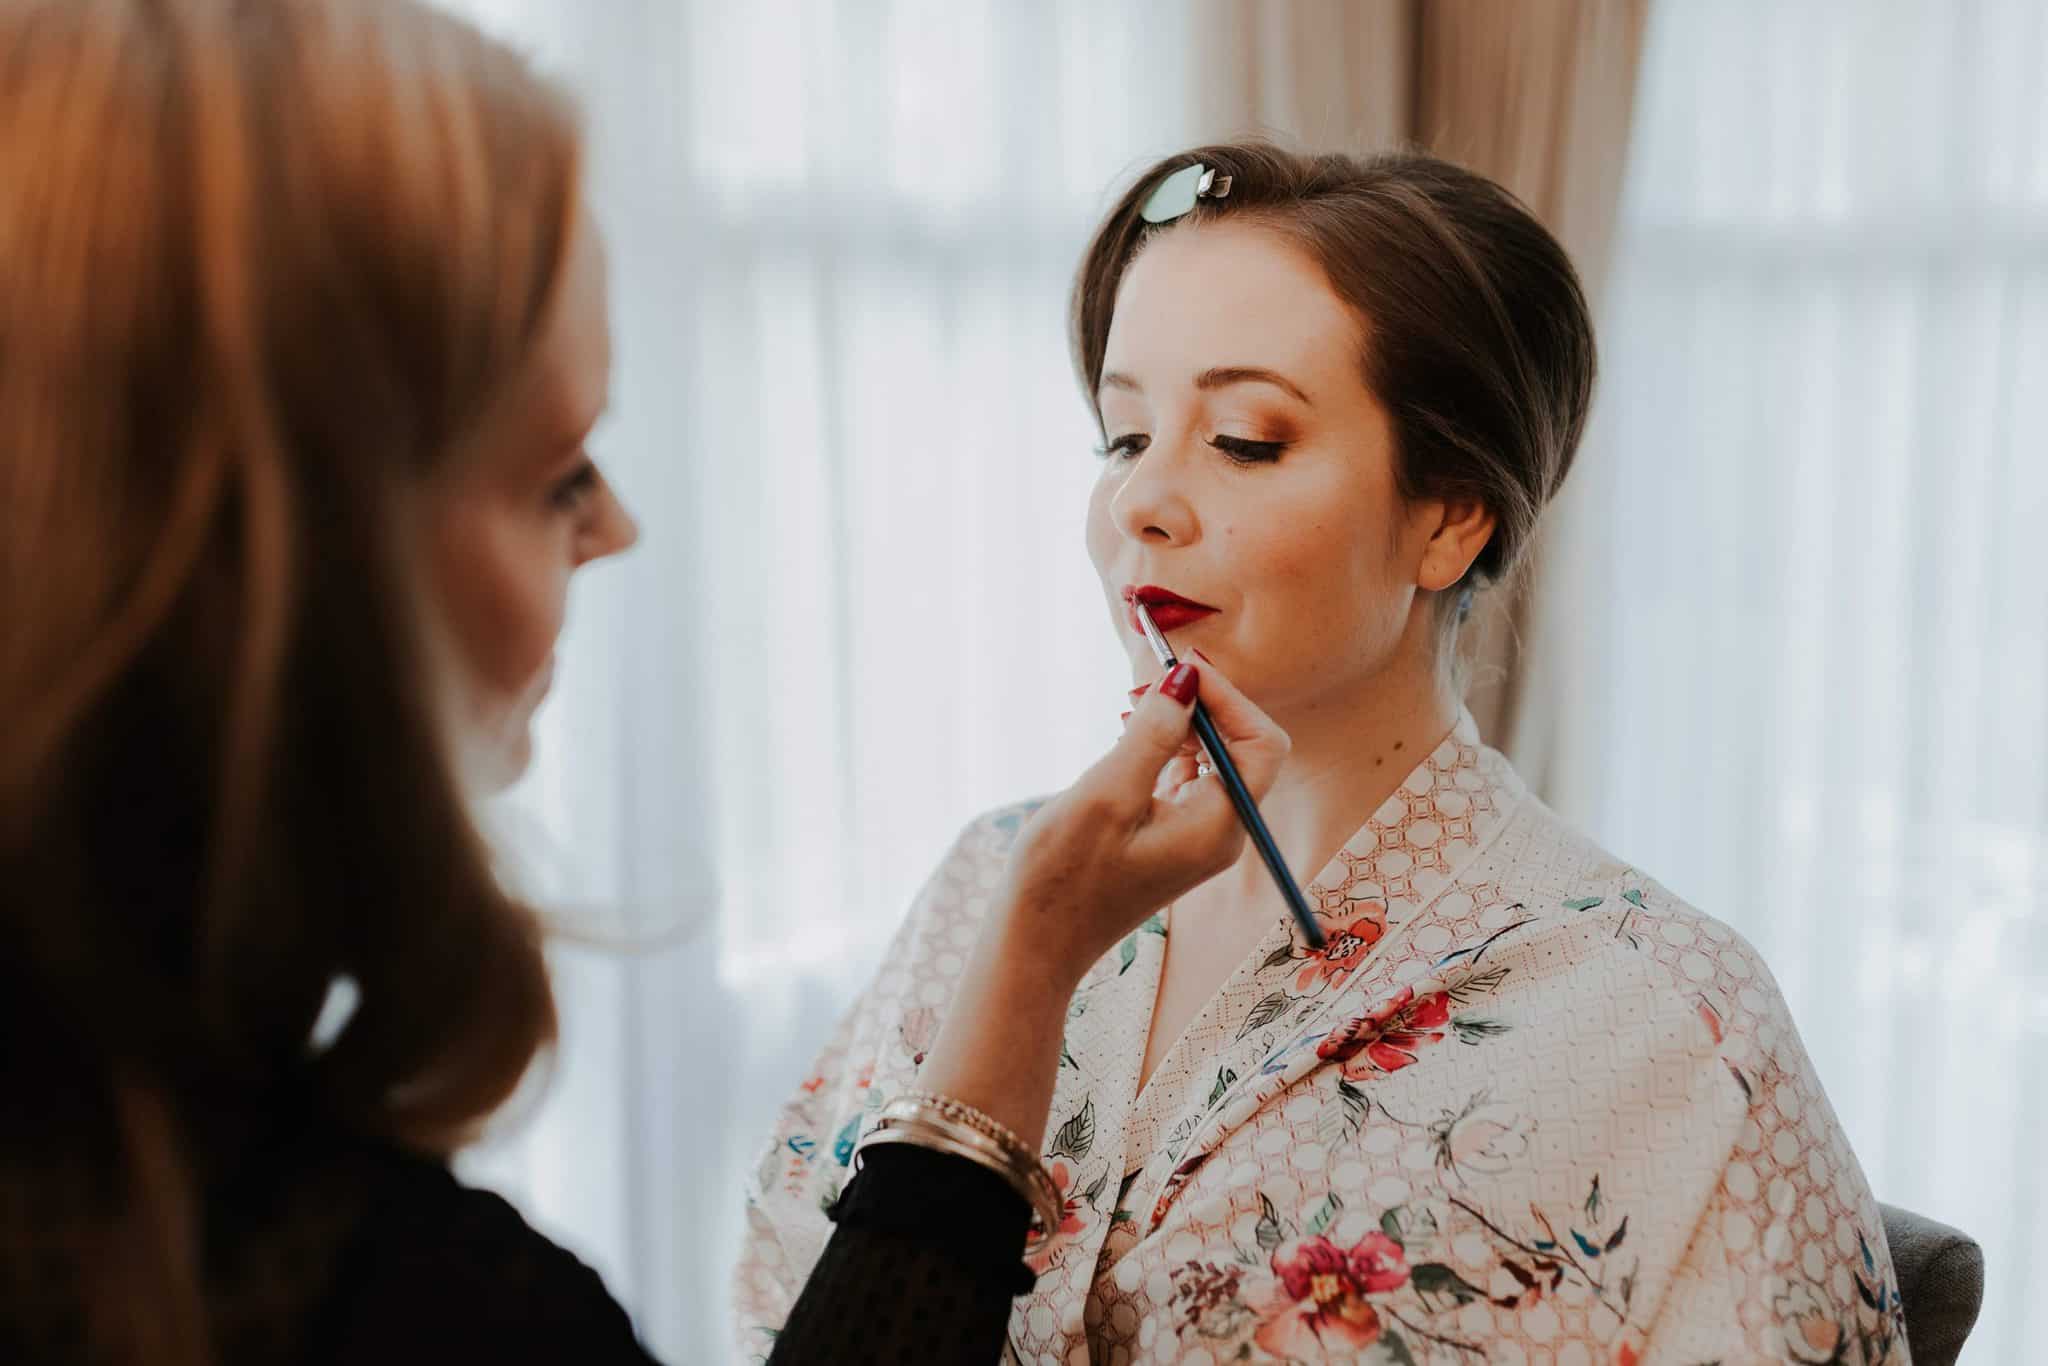 4 Tips To Find Your Perfect Wedding Make-Up Artist